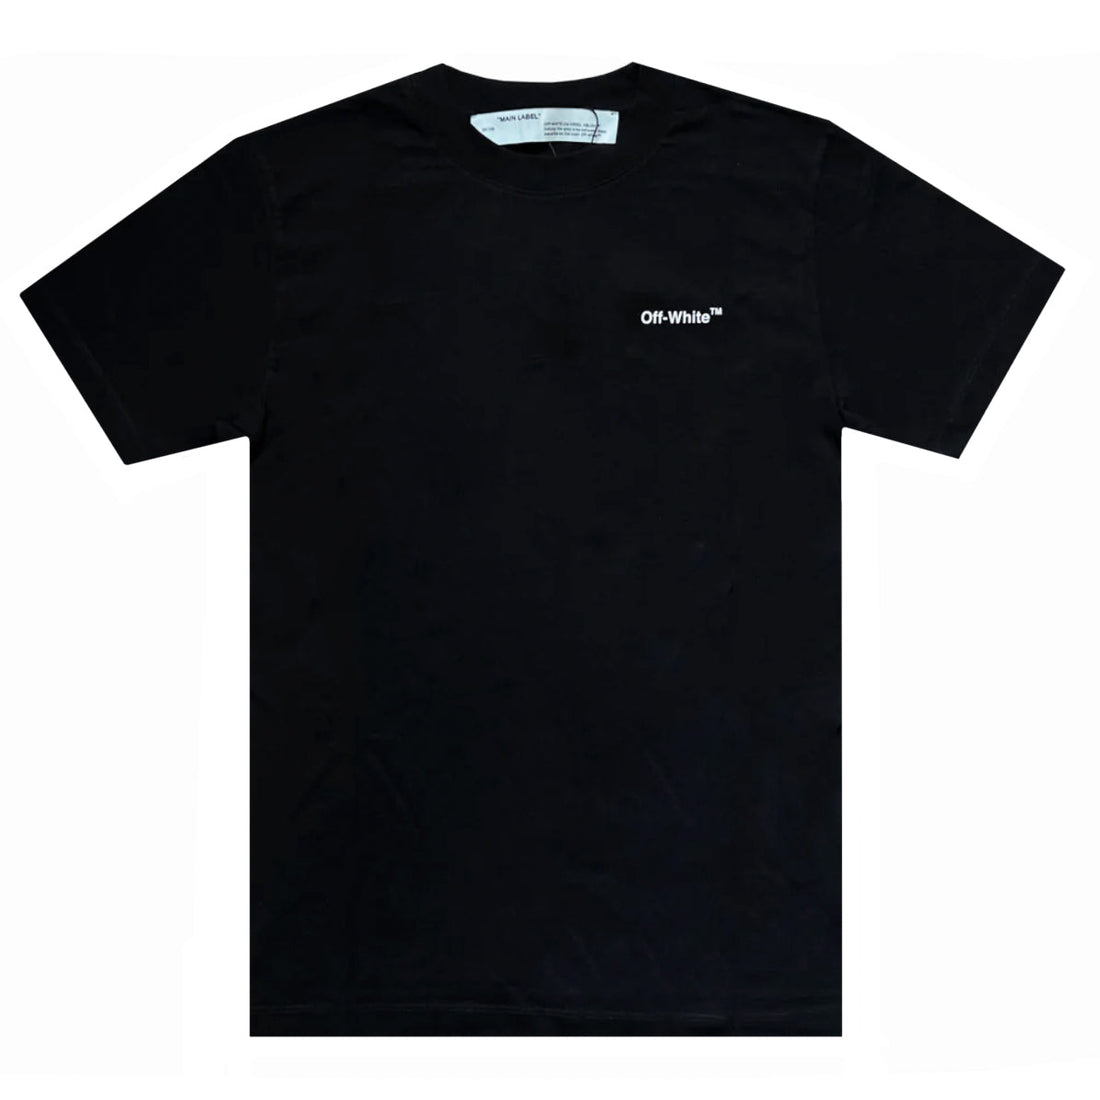 Off-White Outlined Arrow T-Shirt